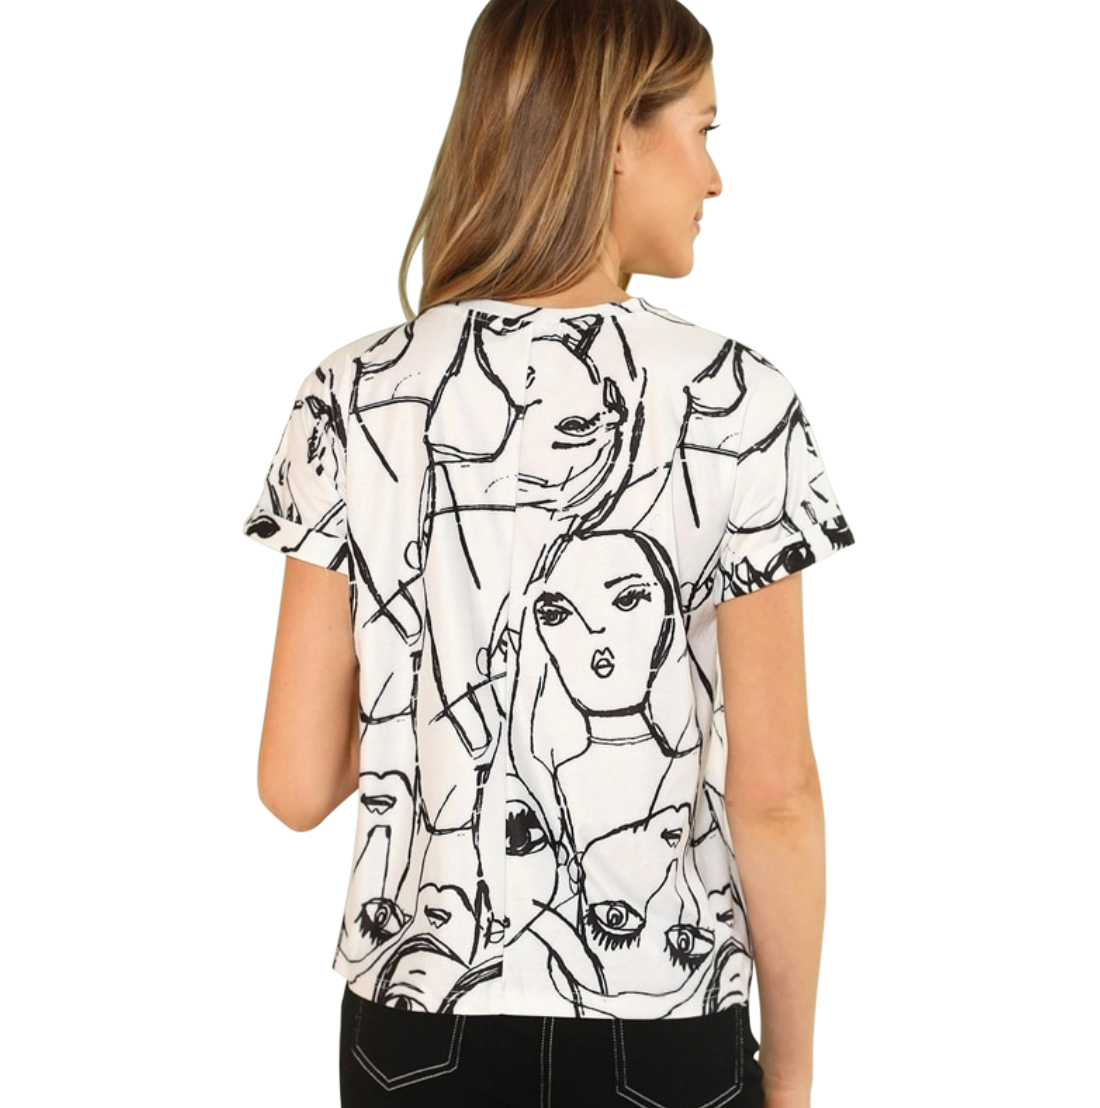 Sketched Print Loose fitting T-Shirt - coleculture